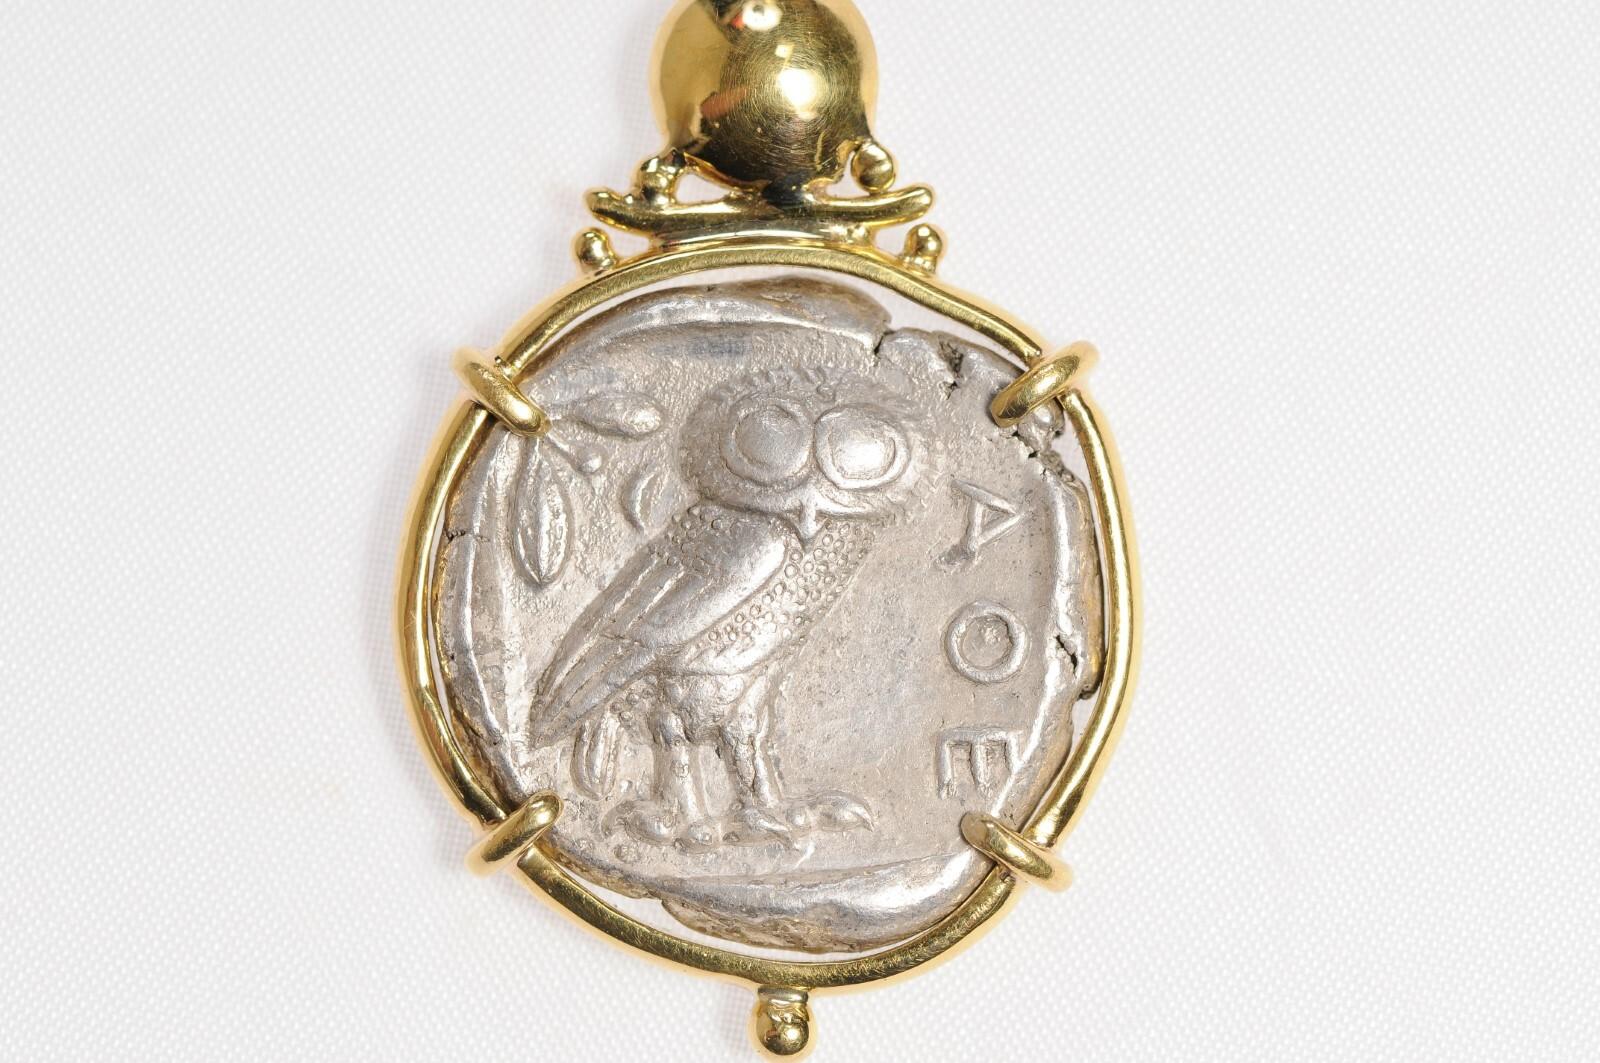 A silver Tetradrachm Owl pendant with Diamond accent and 22 kt gold surround. Decorative gold details add a beautiful touch to this already remarkable Tetradrachm piece. On the reverse side, there is an AOE and owl with an olive sprig and crescent